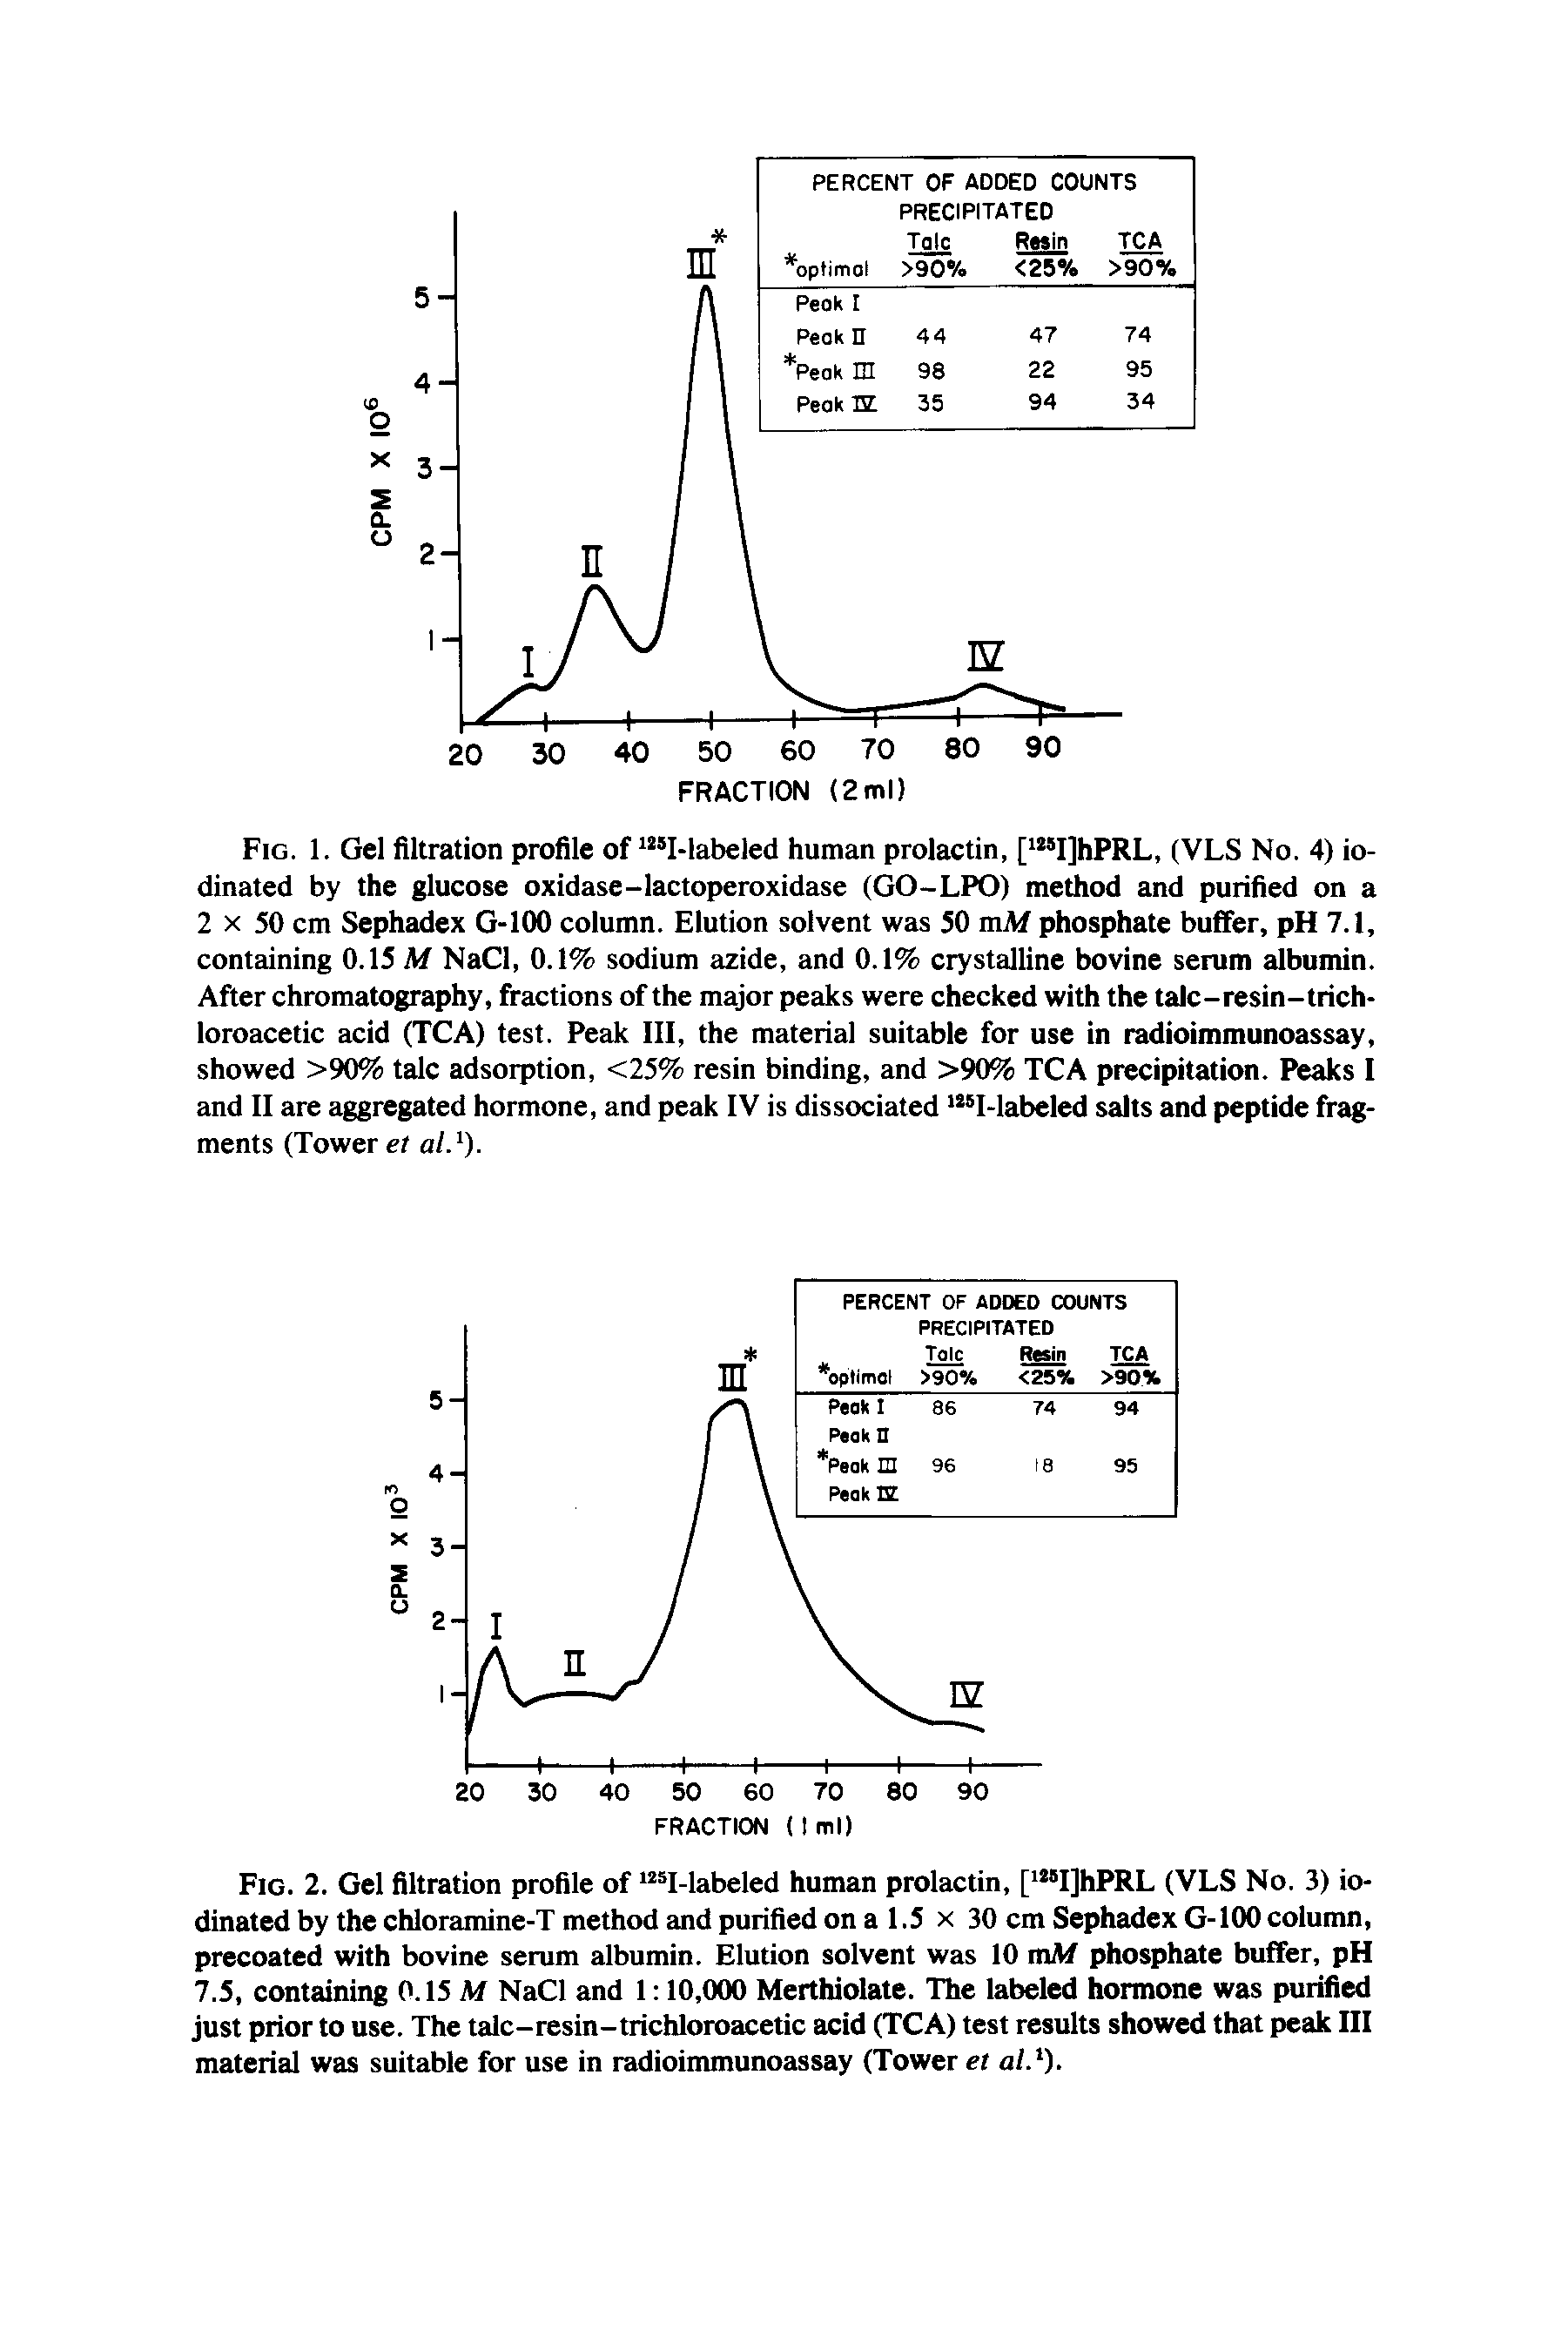 Fig. 2. Gel filtration profile of I-labeled human prolactin, [ I]hPRL (VLS No. 3) io-dinated by the chloramine-T method and purified on a 1.5 x 30 cm Sephadex G-100 column, precoated with bovine serum albumin. Elution solvent was 10 mM phosphate buffer, pH 7.5, containing 0.15 M NaCl and 1 10,000 Merthiolate. The labeled hormone was purified just prior to use. The talc-resin-trichloroacetic acid (TCA) test results showed that peak III material was suitable for use in radioimmunoassay (Tower et al. ).